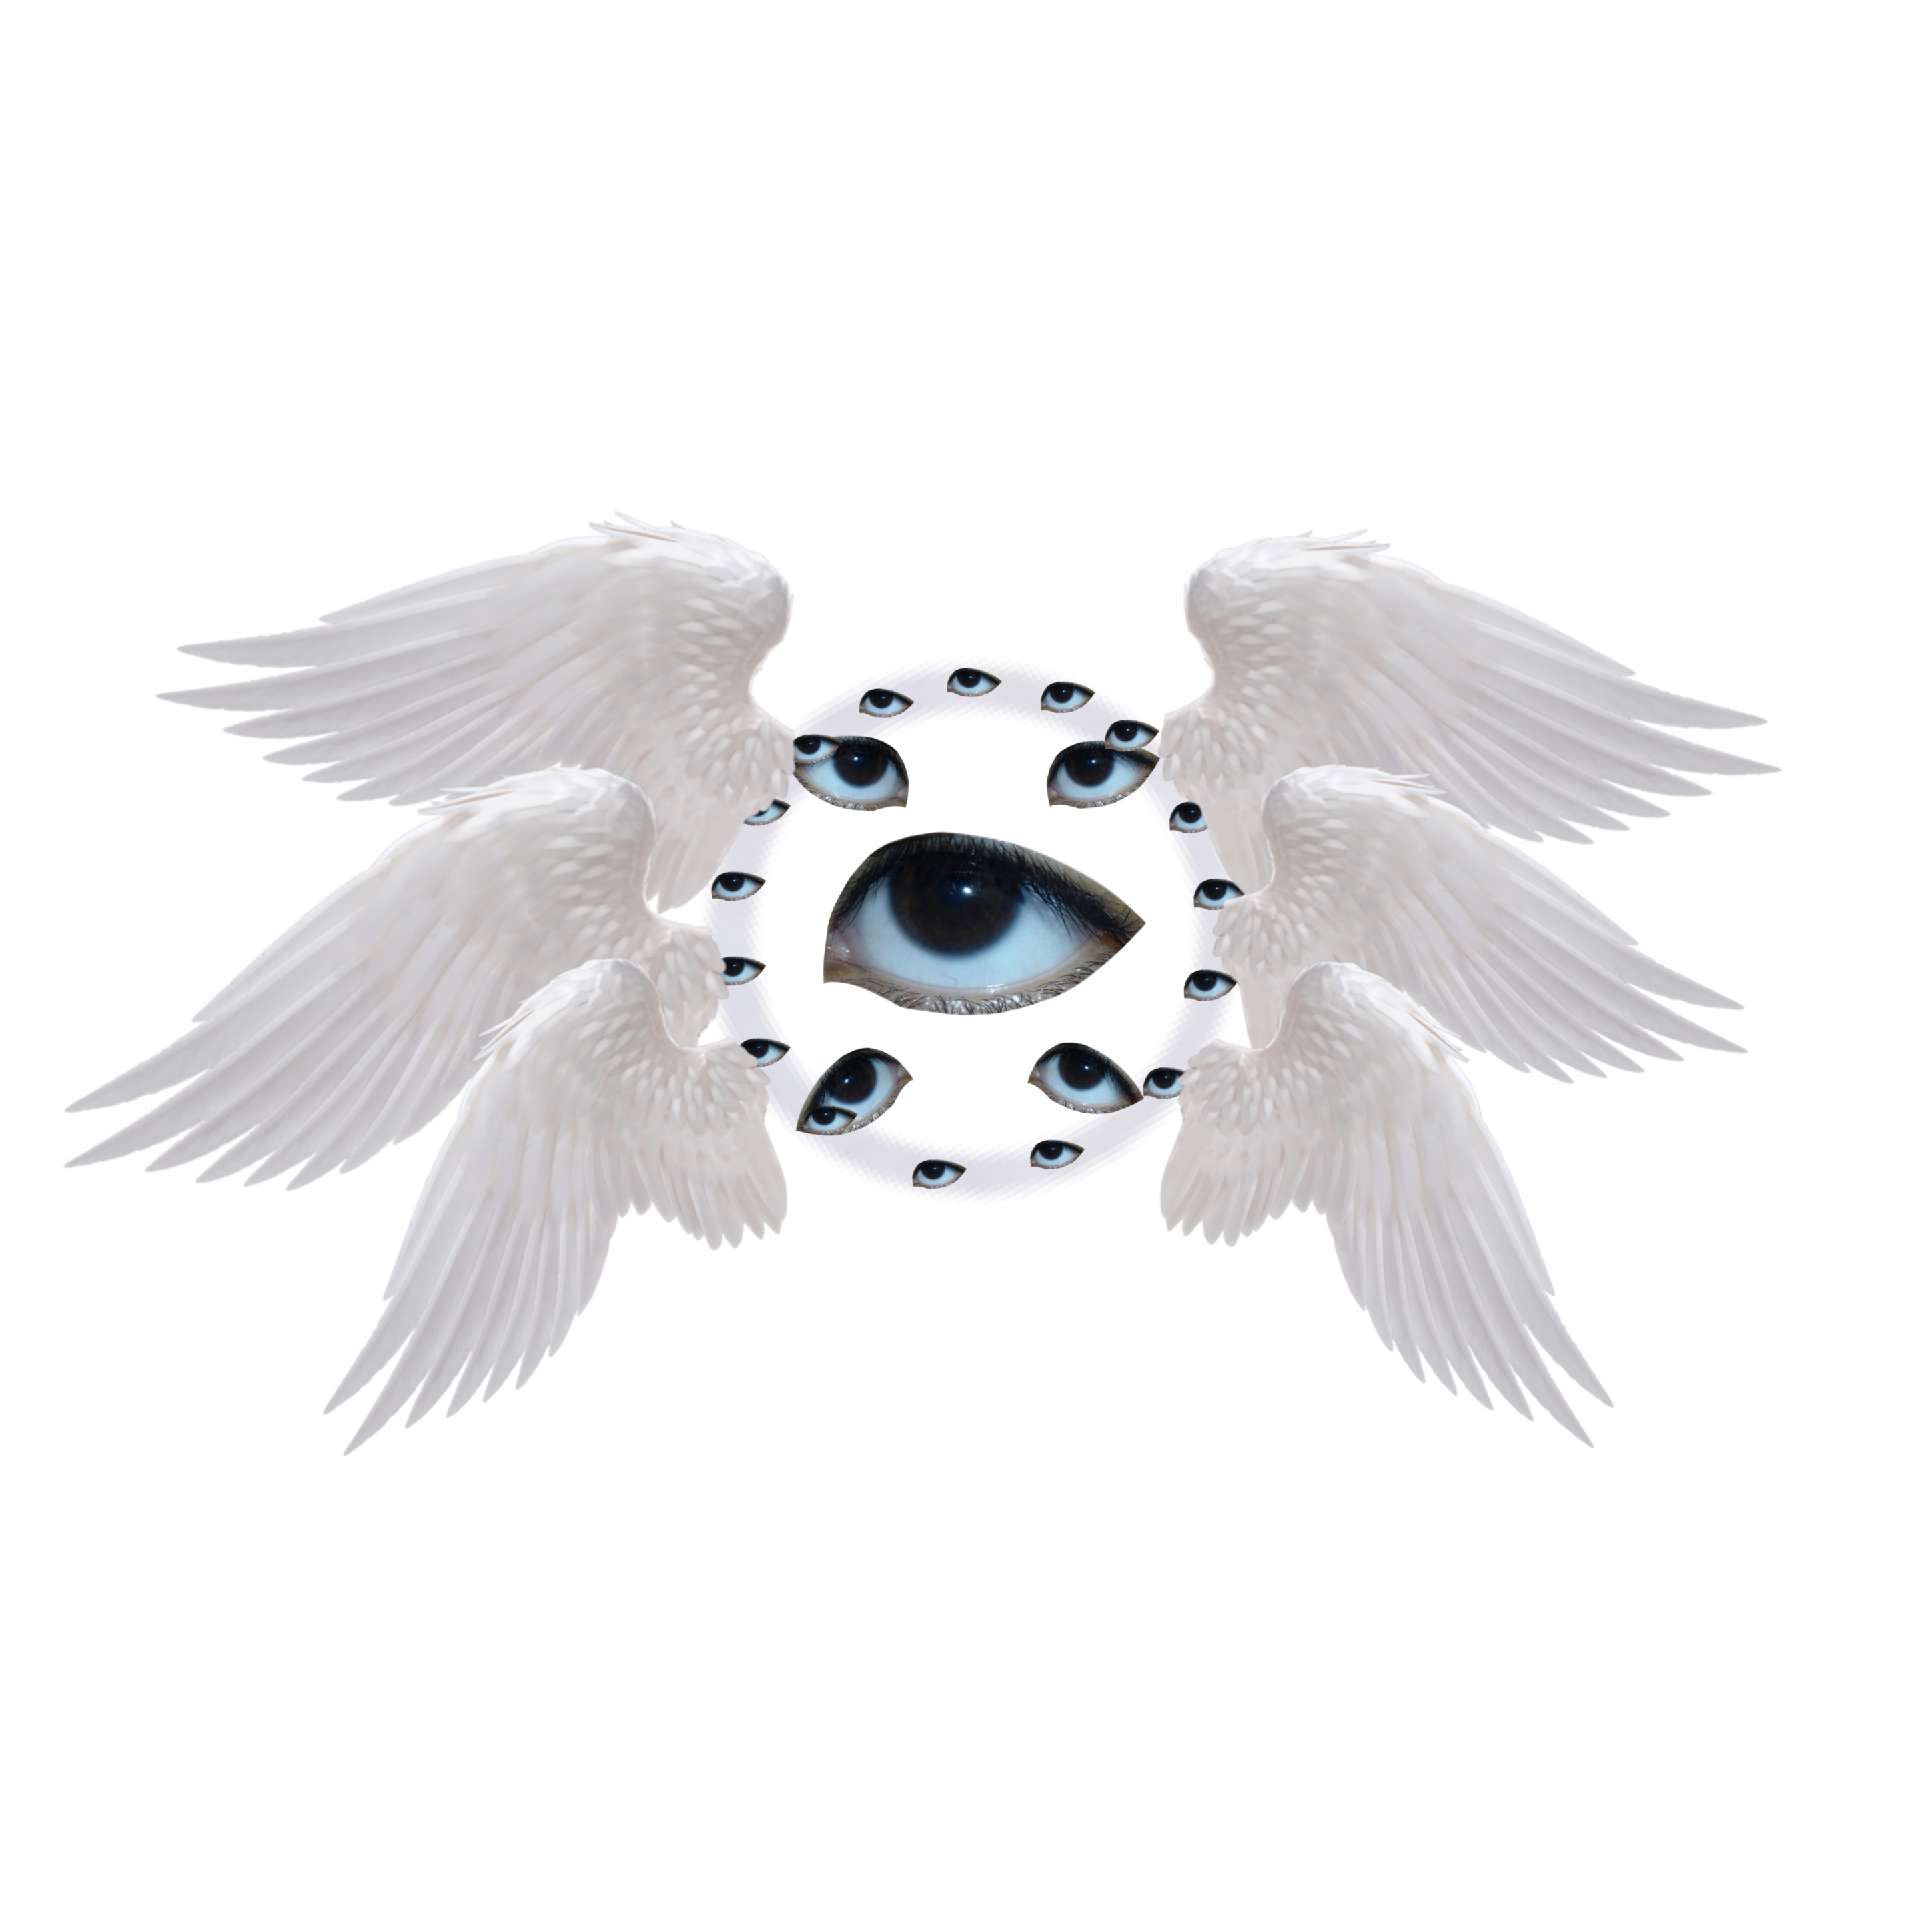 weirdcore eyes and wings | Sticker